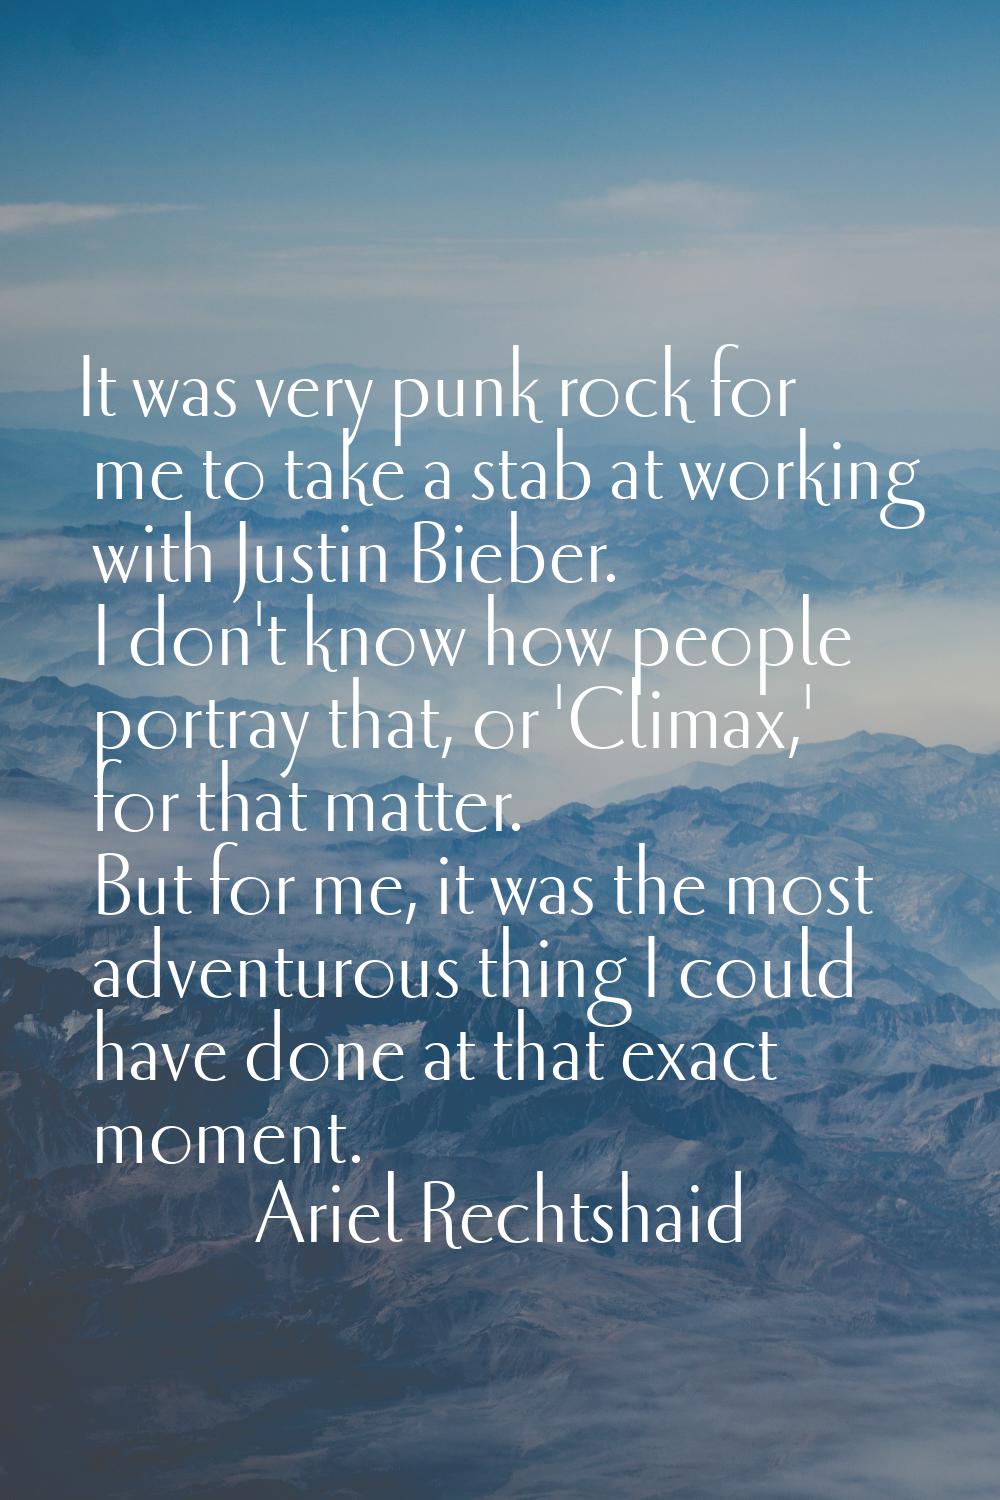 It was very punk rock for me to take a stab at working with Justin Bieber. I don't know how people 